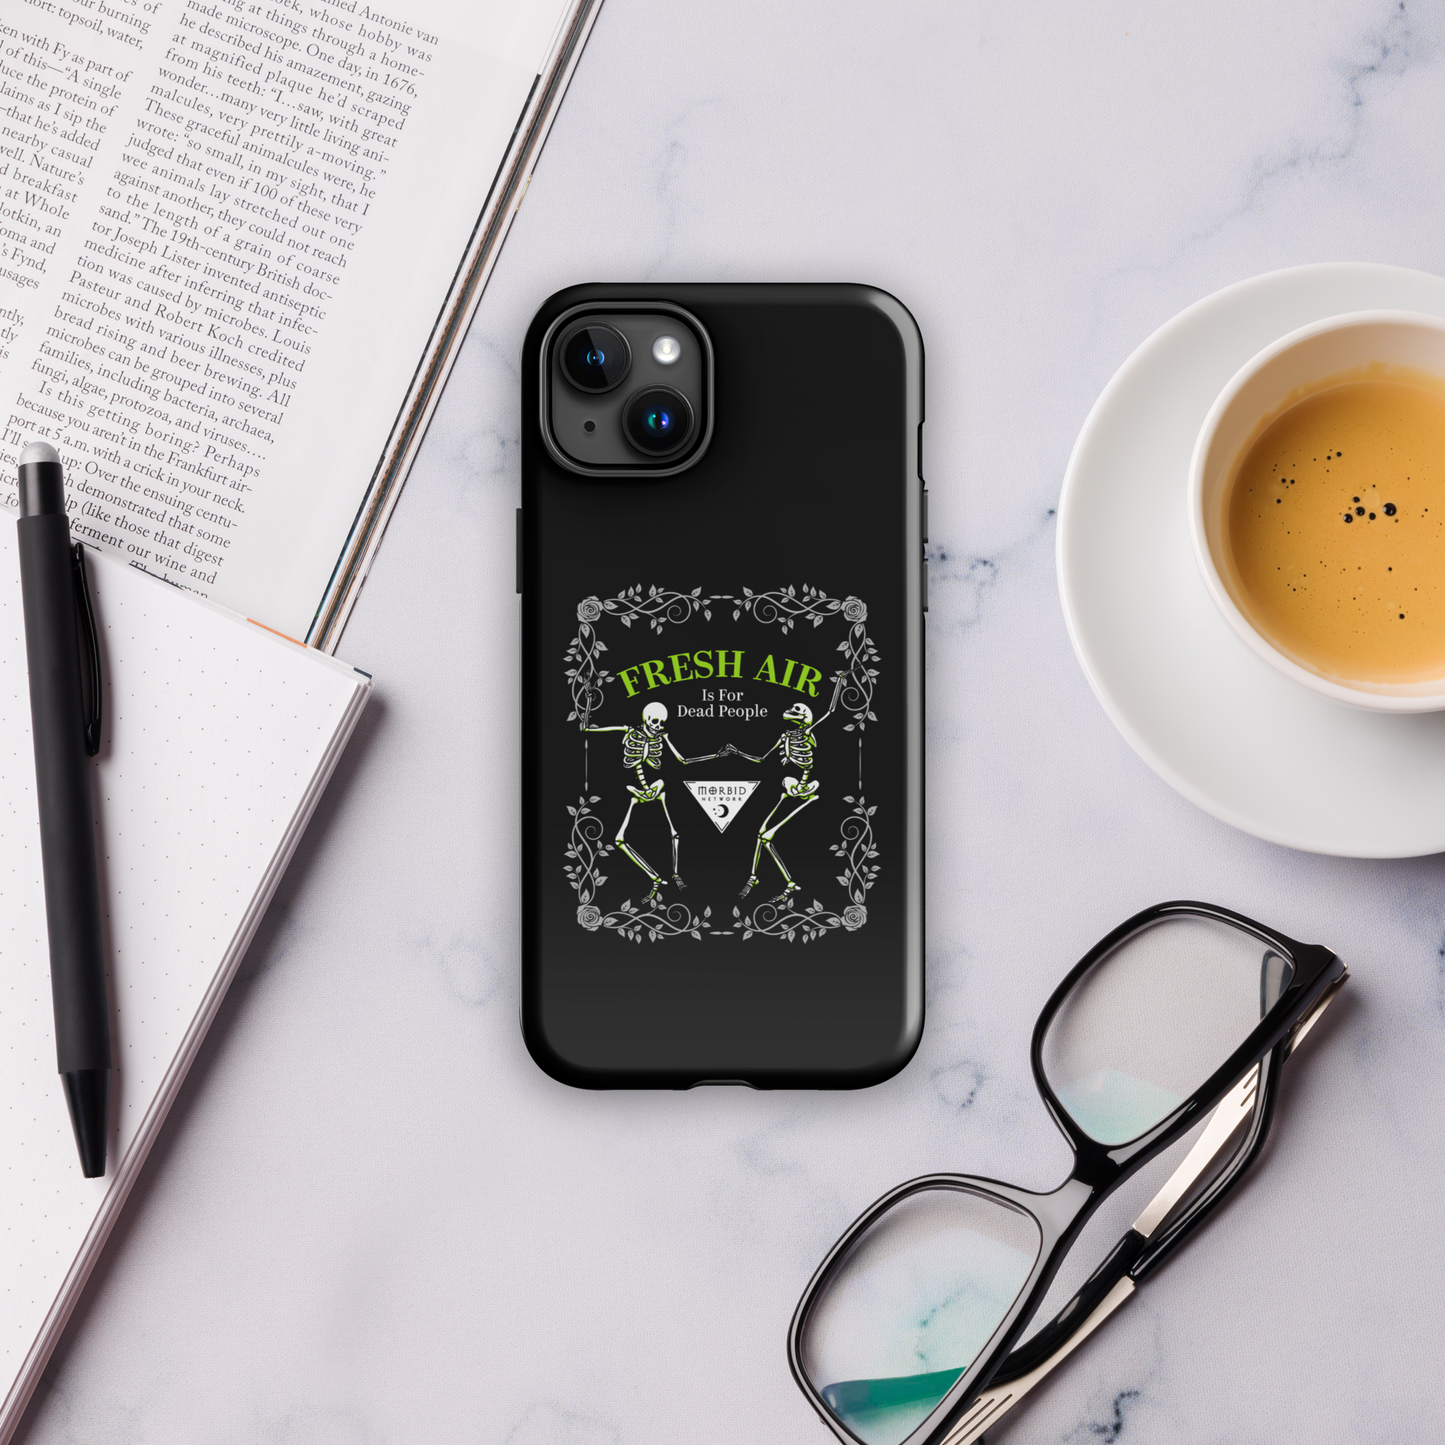 Morbid Fresh Air Is For Dead People Tough Phone Case - iPhone